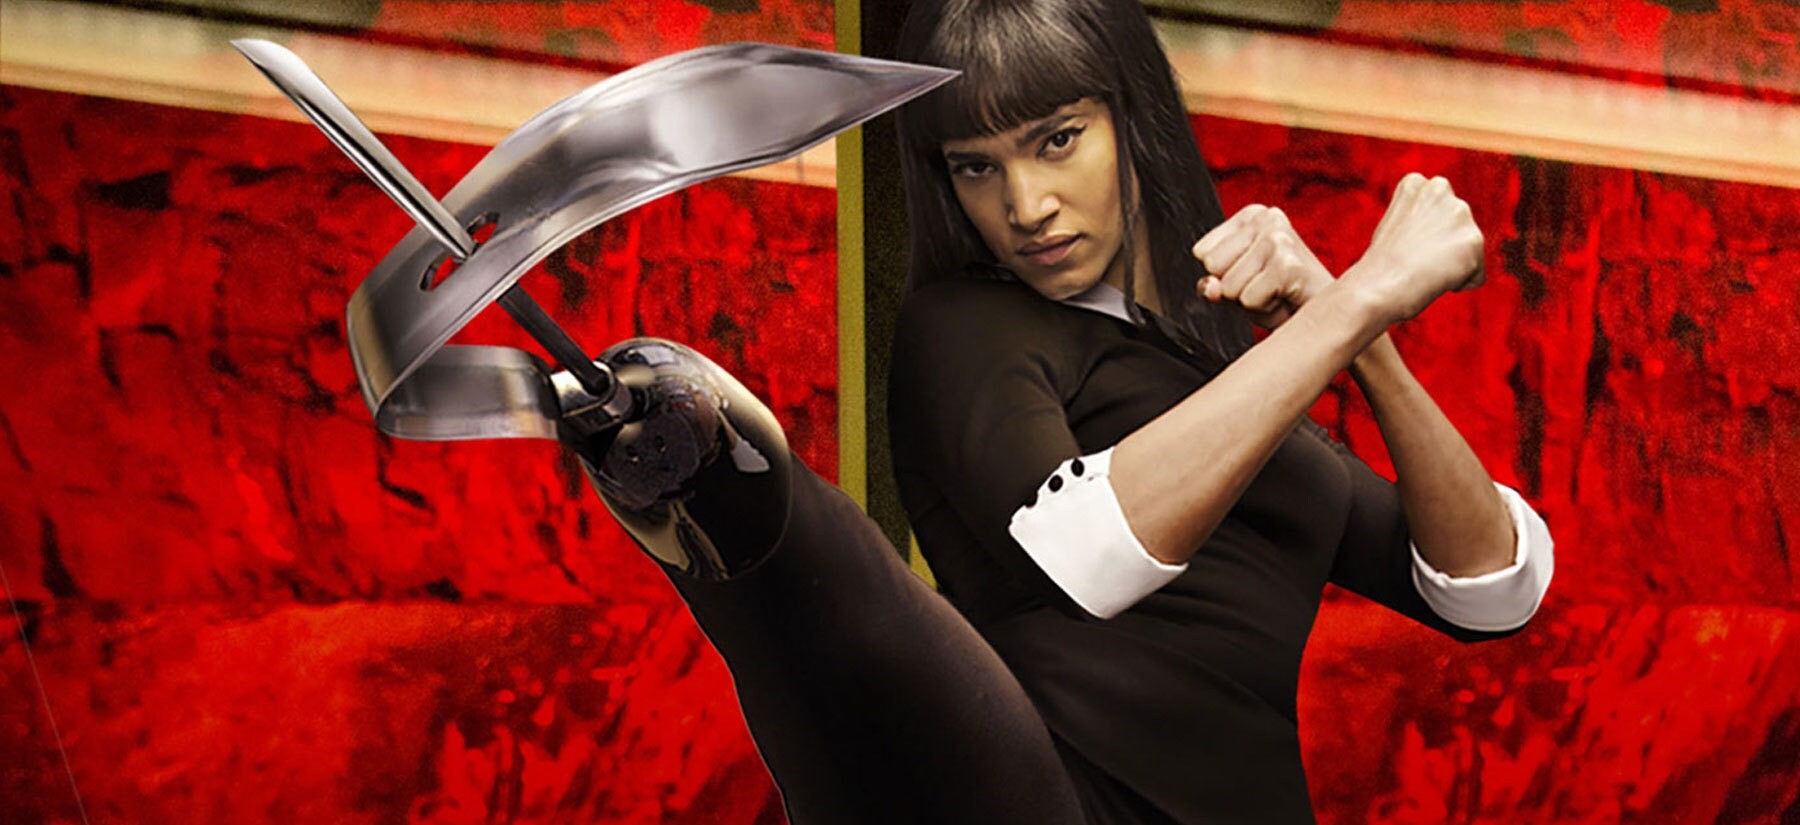 The character Gazelle from the film Kingsman: The Secret Service. A woman with fists clenched and arms crossed in a fighting pose. She wears a blakc outfit and has long black hair. Her right leg is extended in a fighting pose showing a prosthetic lower limb with weaponised blade